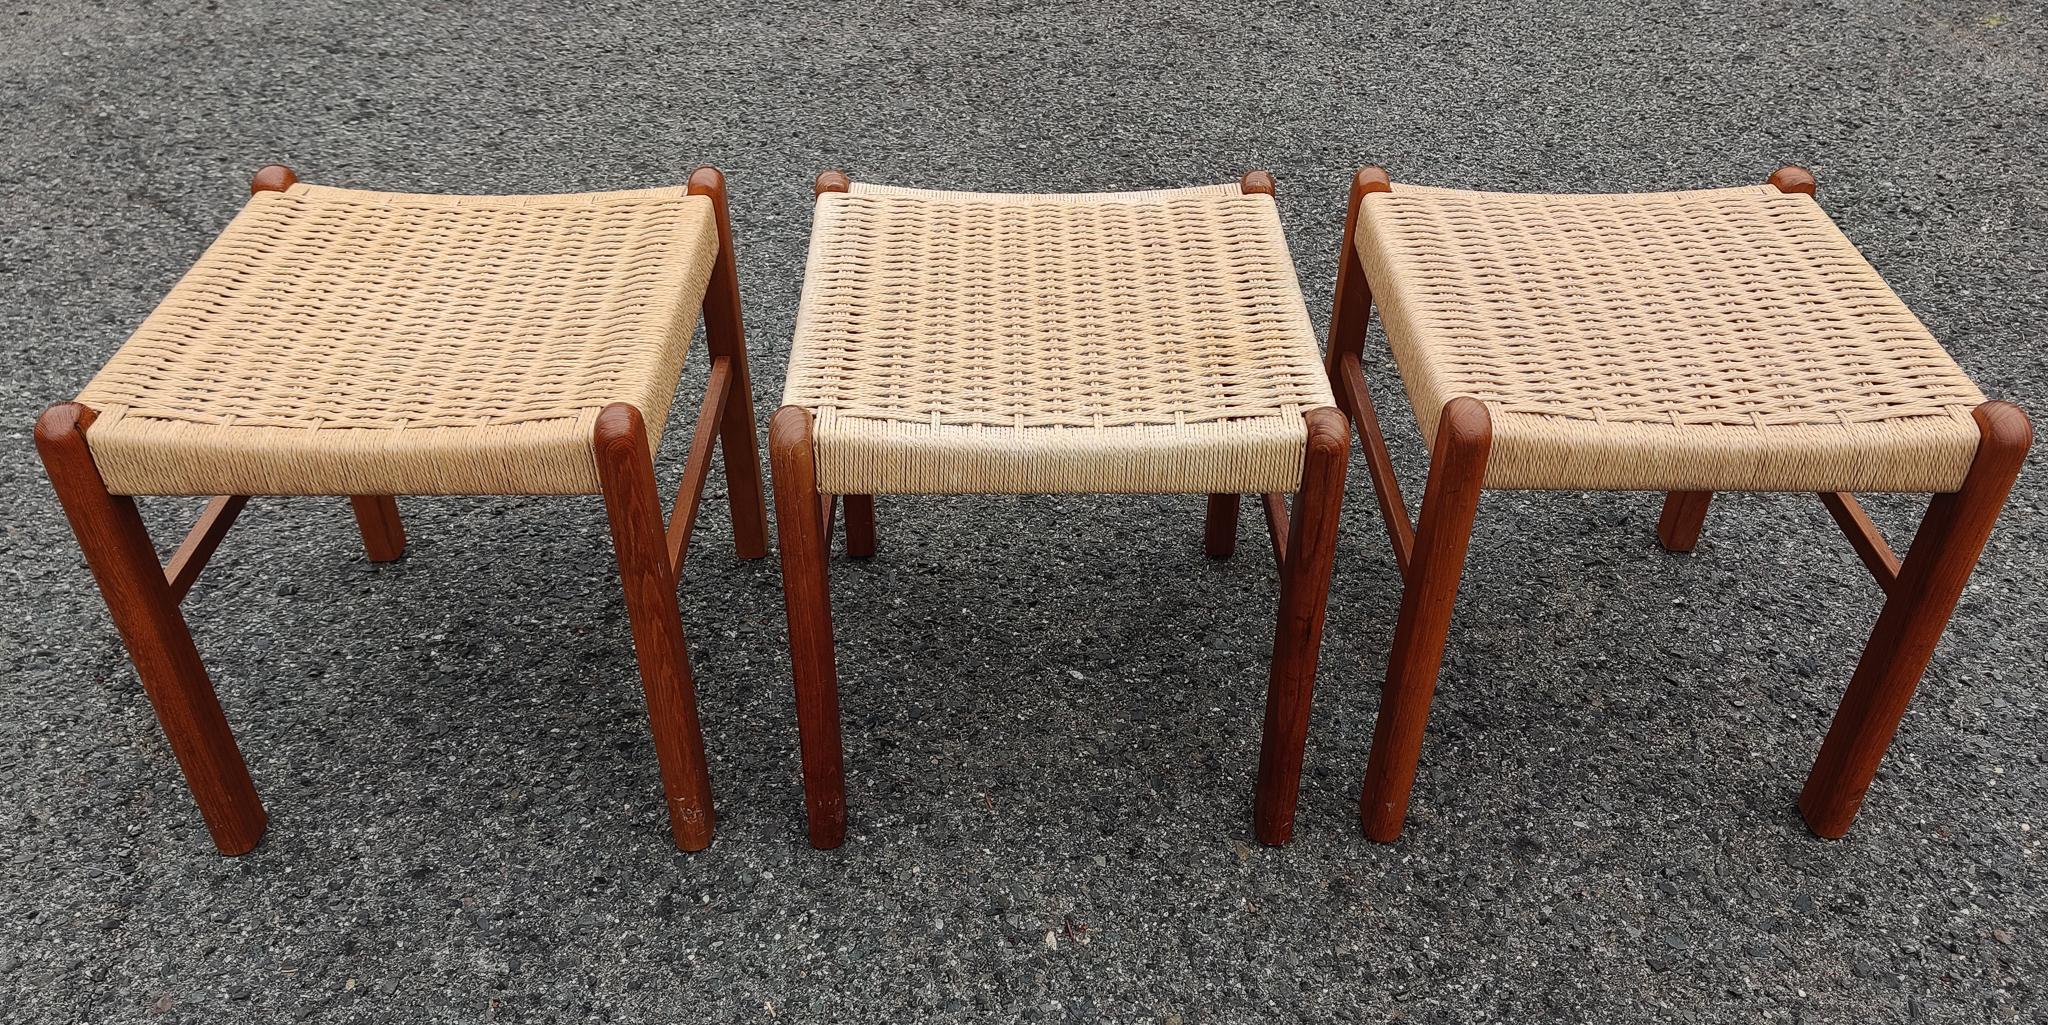 A great trio of well made solid teak construction stools or benches, with paper-cord seats. These small personal benches fit comfortably in a room of any style and size. Oiled teak, curved seats, warm patina, these are just some of the features that